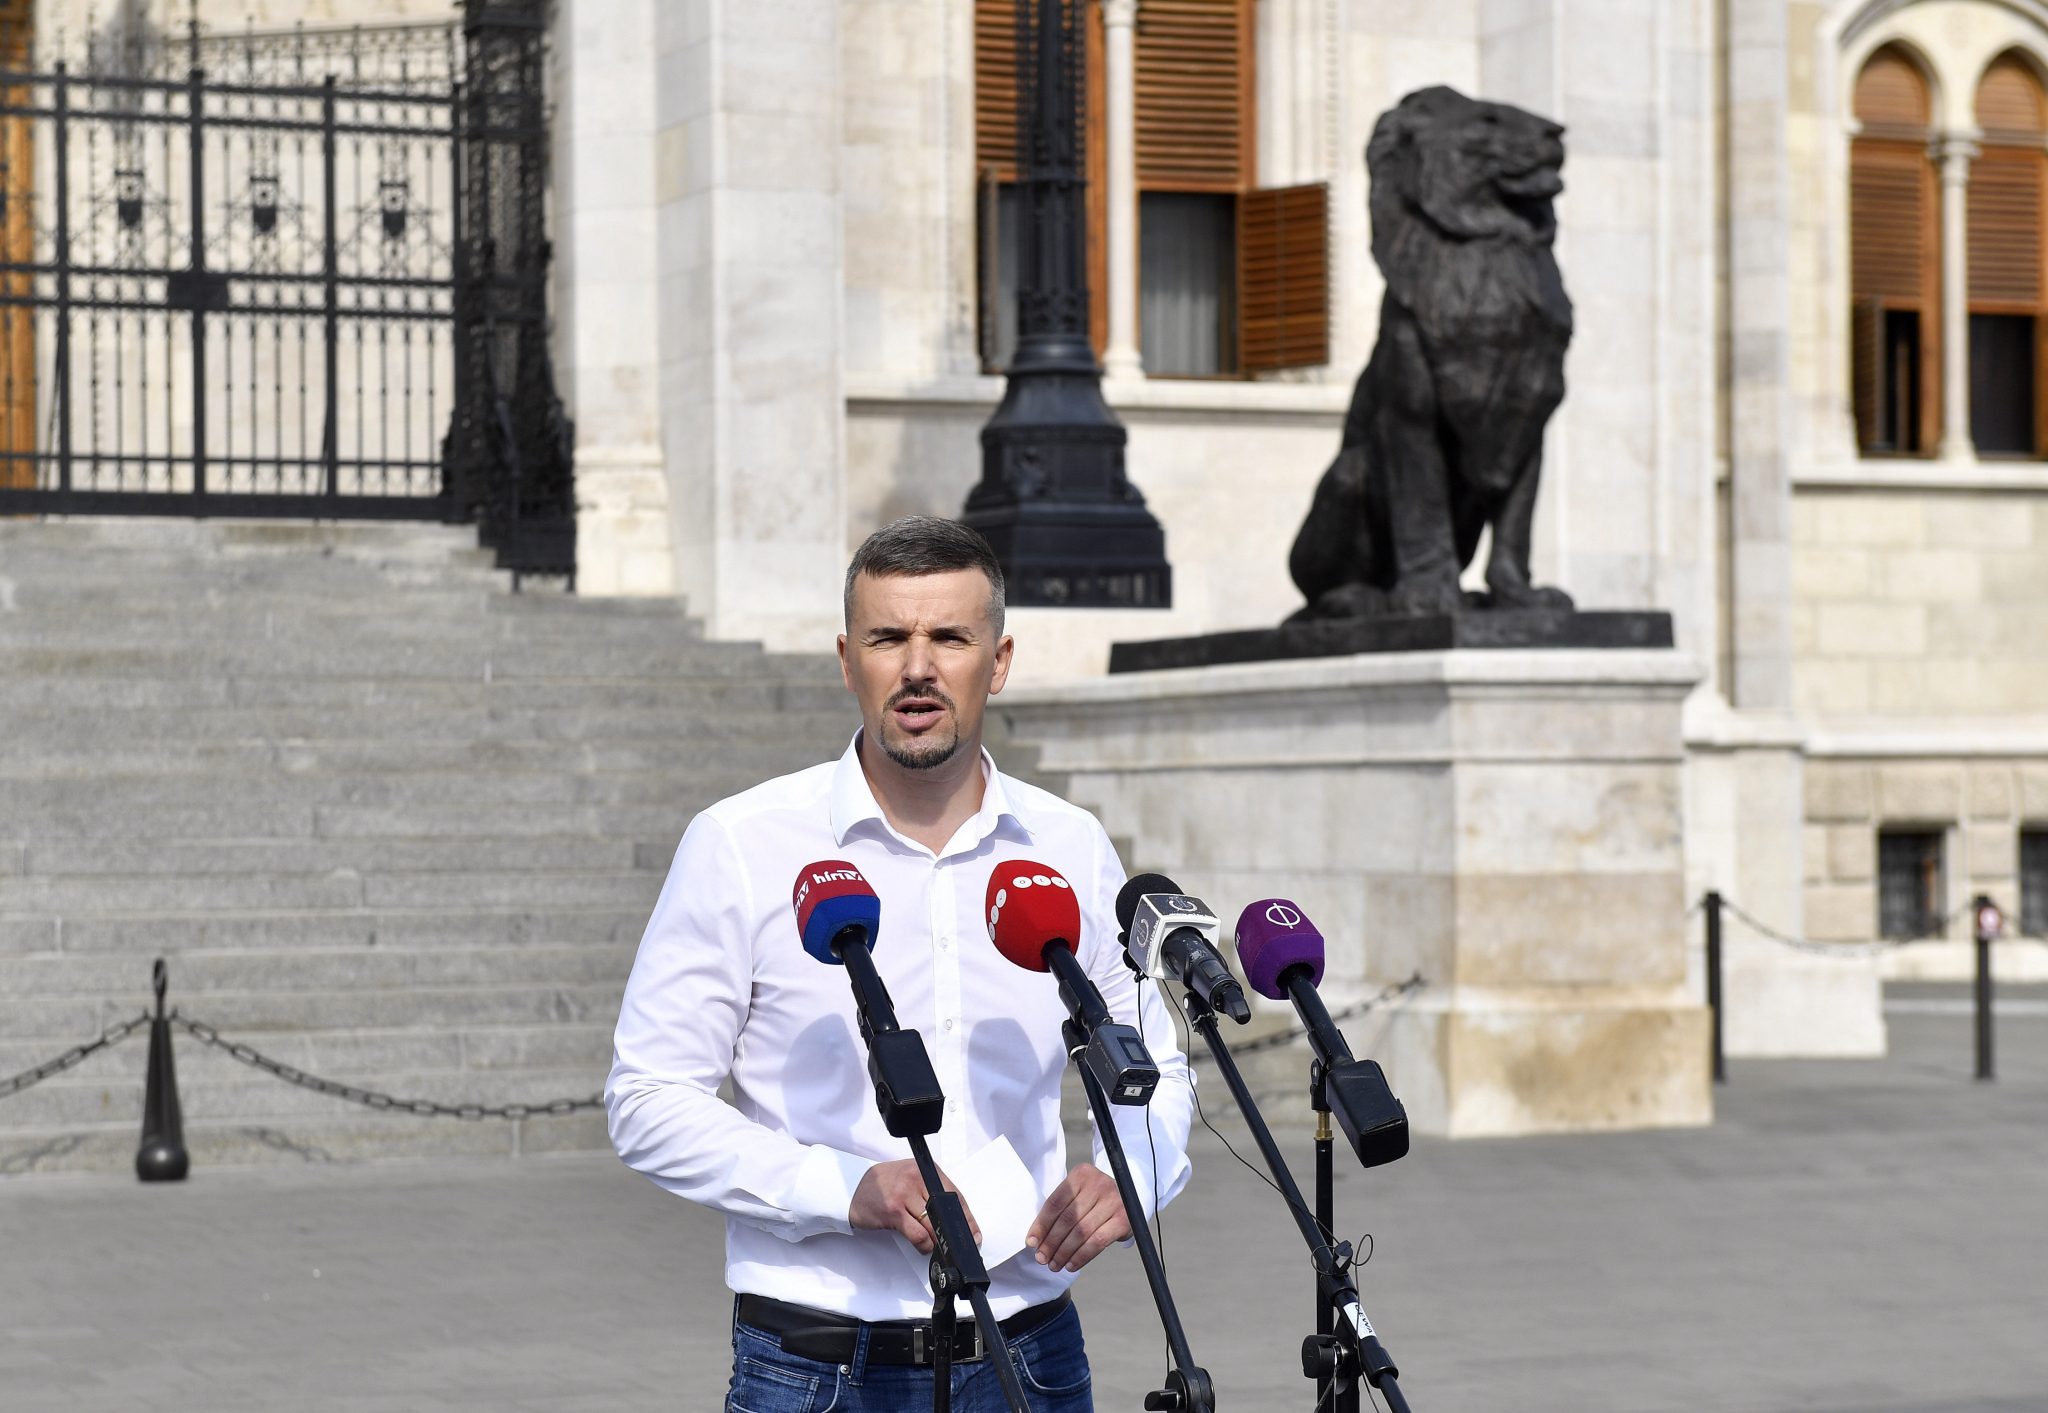 Jobbik Calls for Foundation of New State to Commemorate August 20